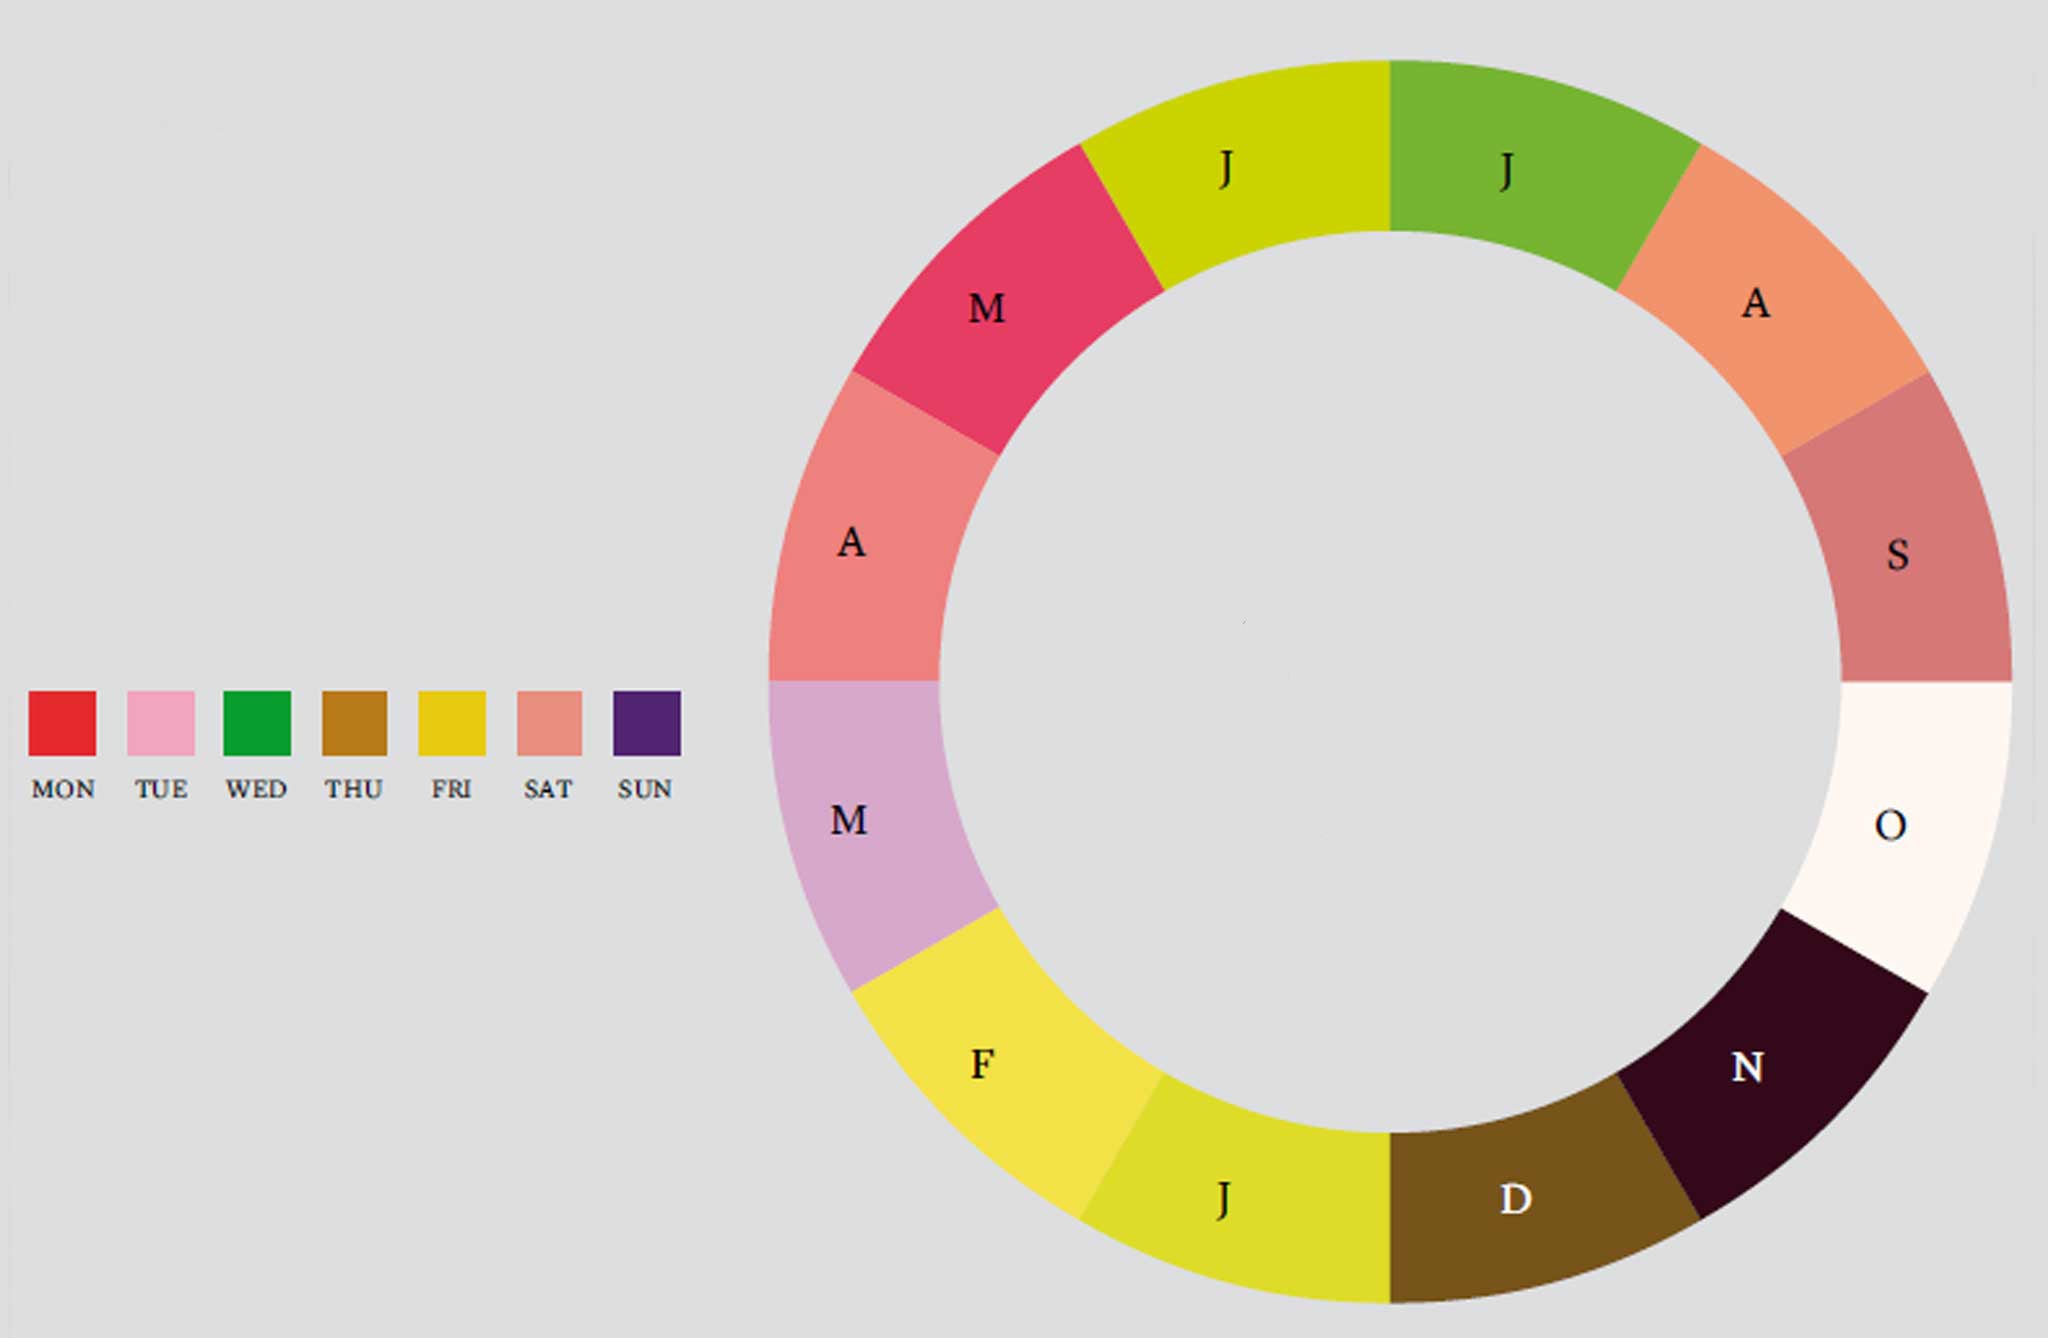 The Circular Chart Used To Remember Color Relationships Is A